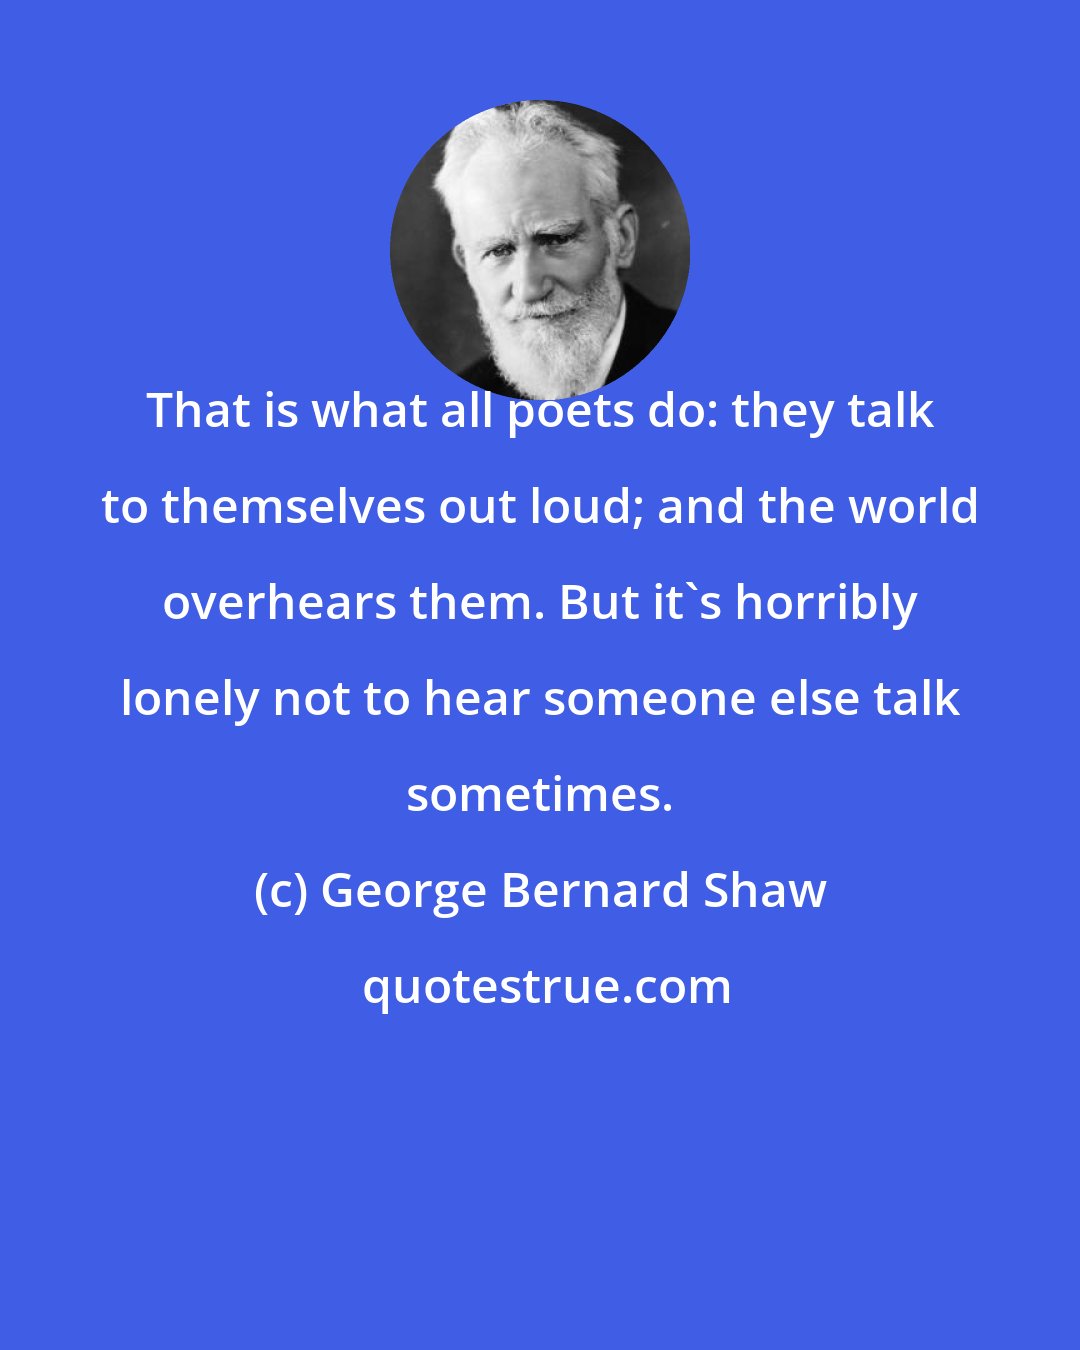 George Bernard Shaw: That is what all poets do: they talk to themselves out loud; and the world overhears them. But it's horribly lonely not to hear someone else talk sometimes.